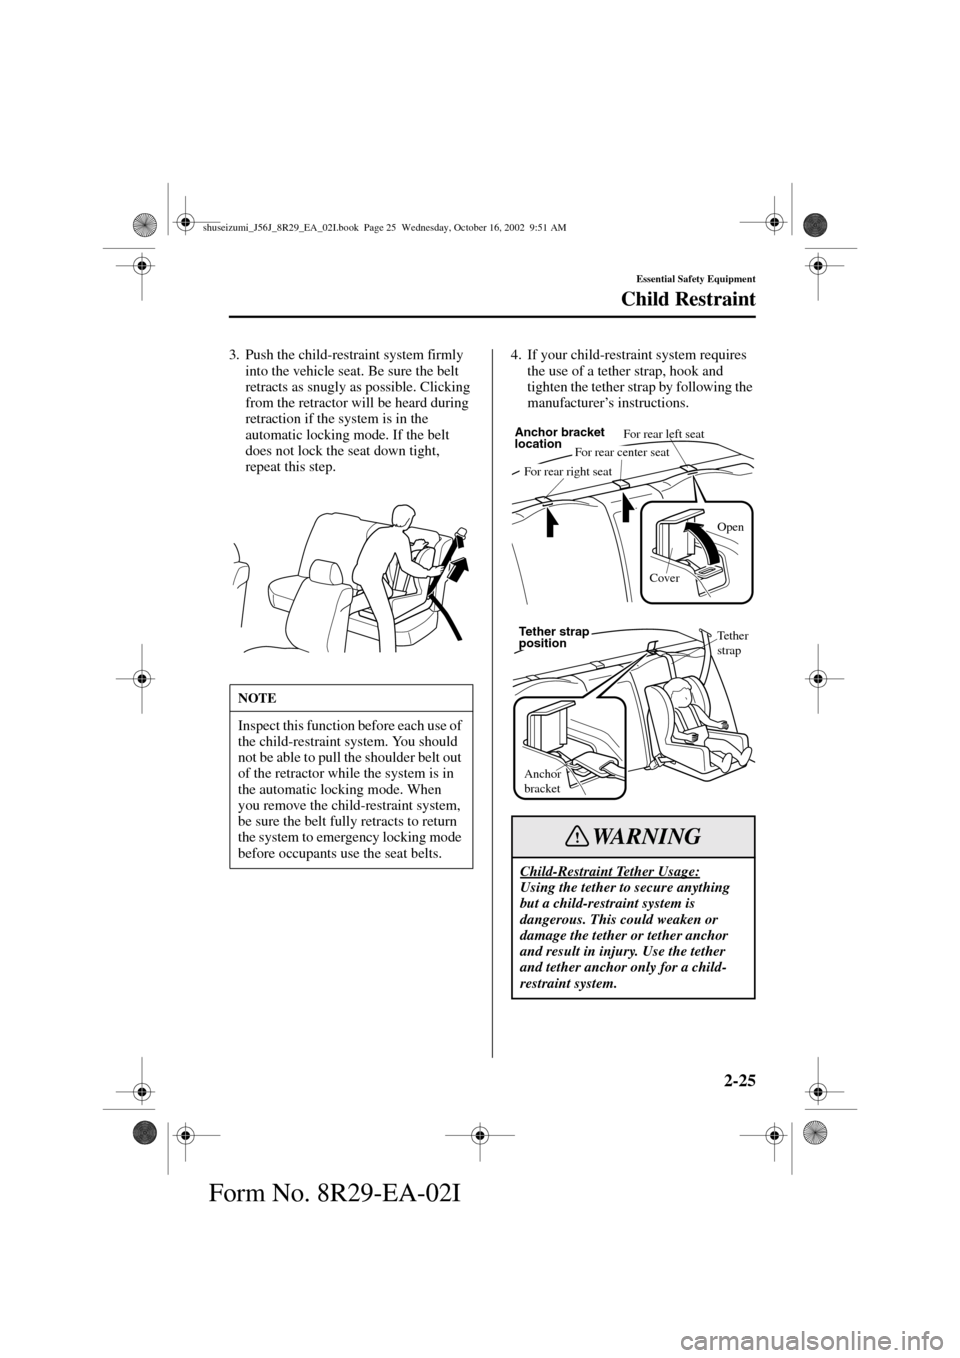 MAZDA MODEL 6 2003   (in English) Owners Guide 2-25
Essential Safety Equipment
Child Restraint
Form No. 8R29-EA-02I
3. Push the child-restraint system firmly 
into the vehicle seat. Be sure the belt 
retracts as snugly as possible. Clicking 
from 